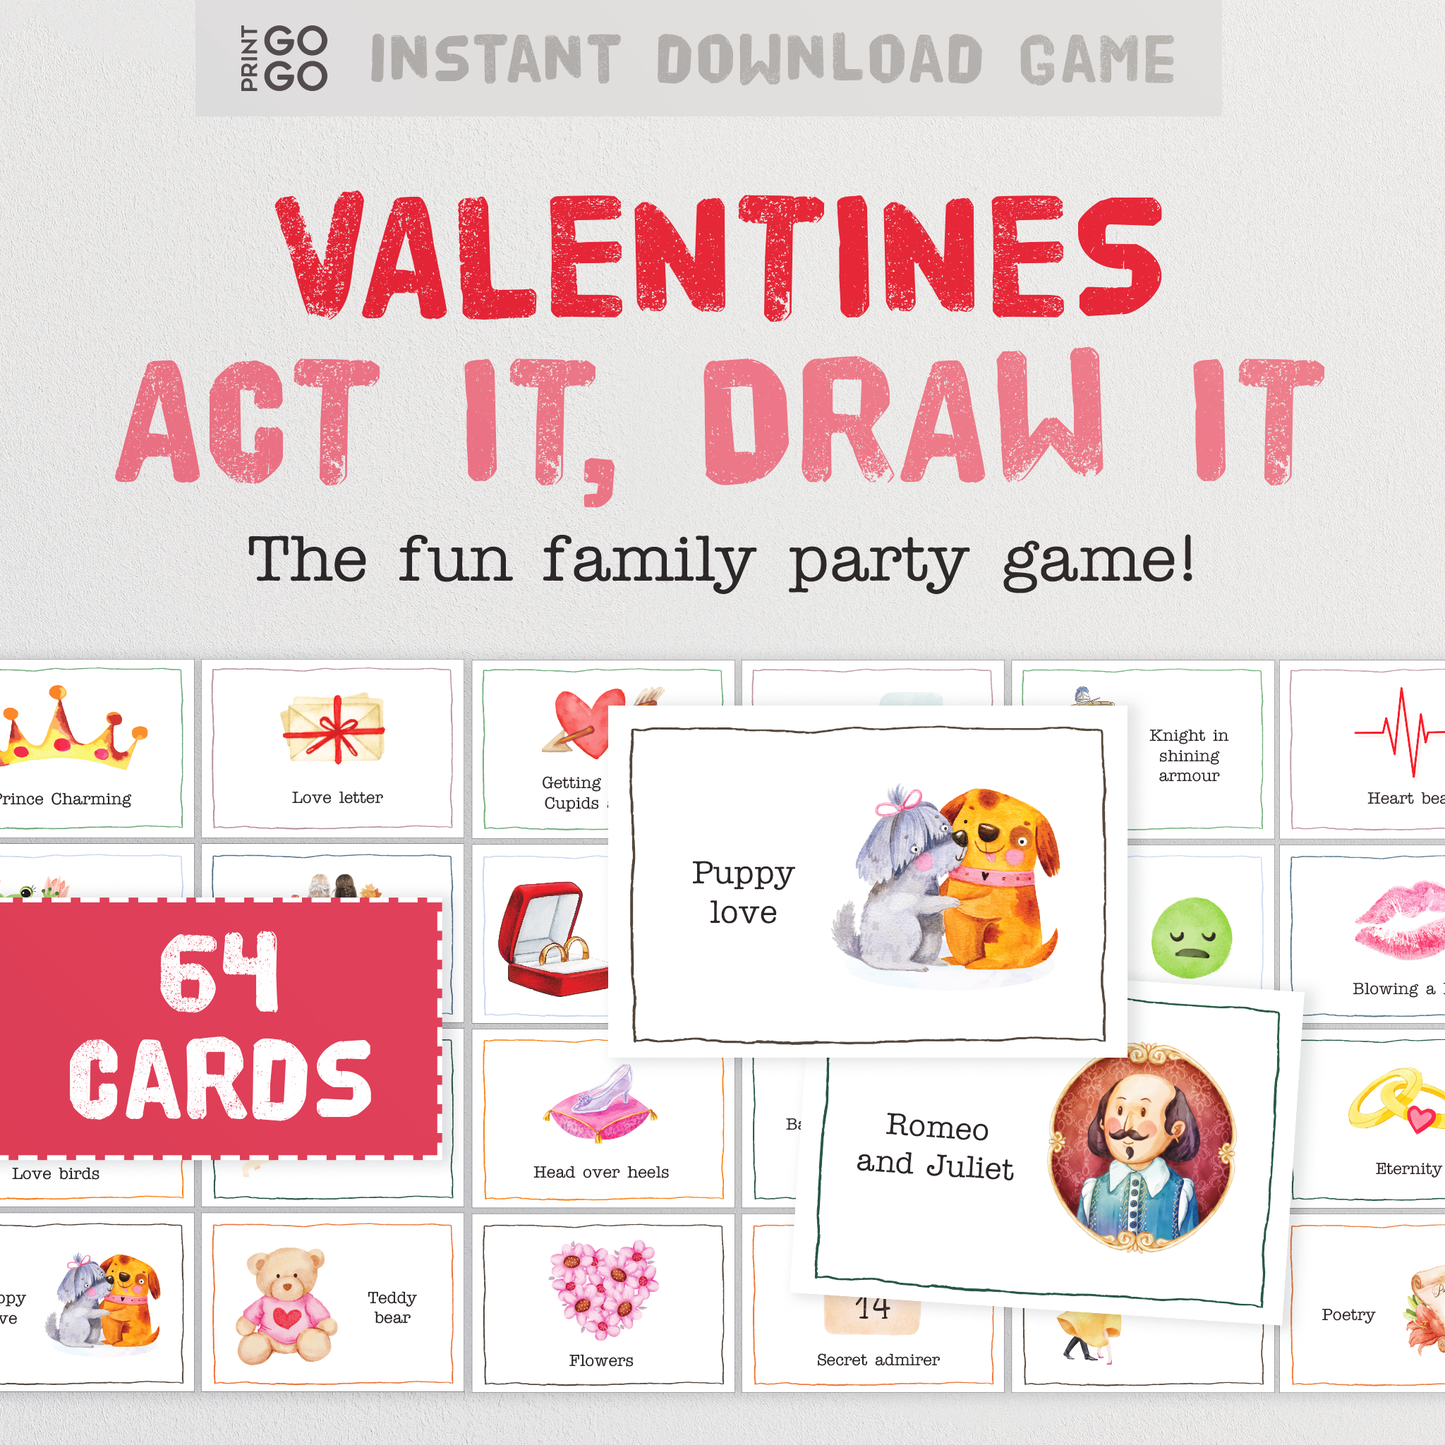 Valentines Act It, Draw It - The Party Game of Acting Out, Drawing and Guessing Phrases